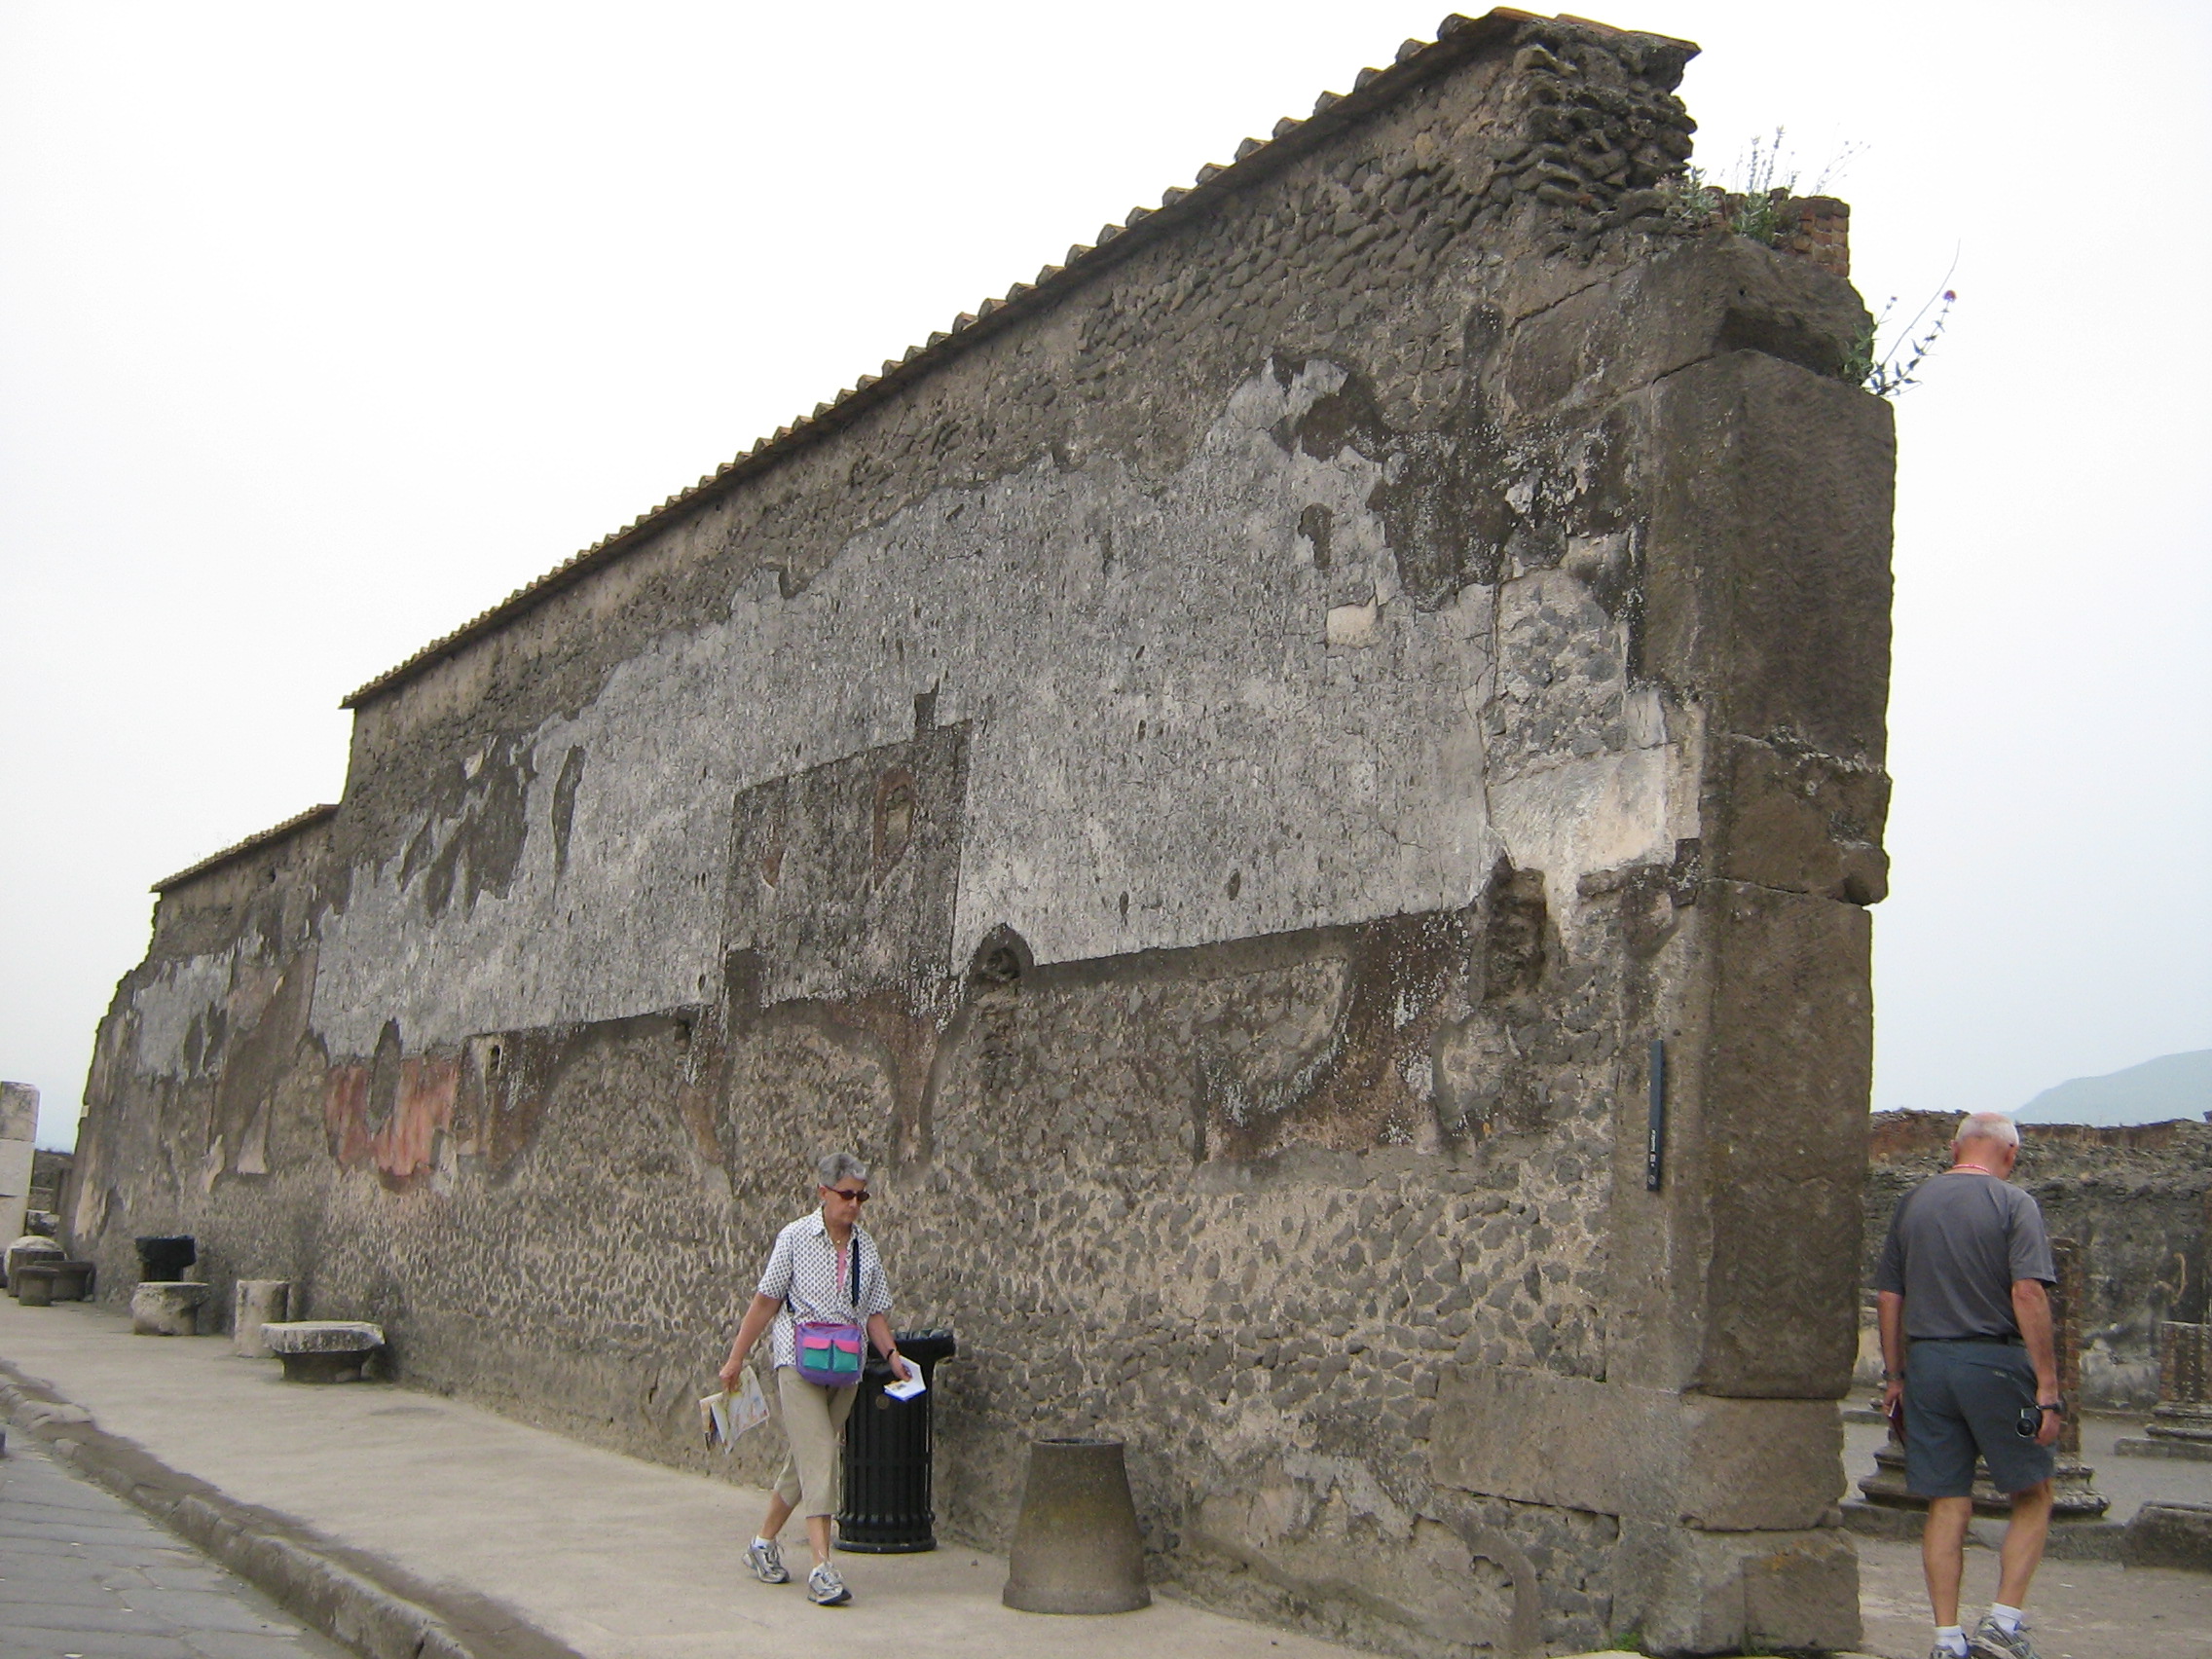 Daily Photos & Frugal Travel Tips » Blog Archive » Basilica, Pompeii ...